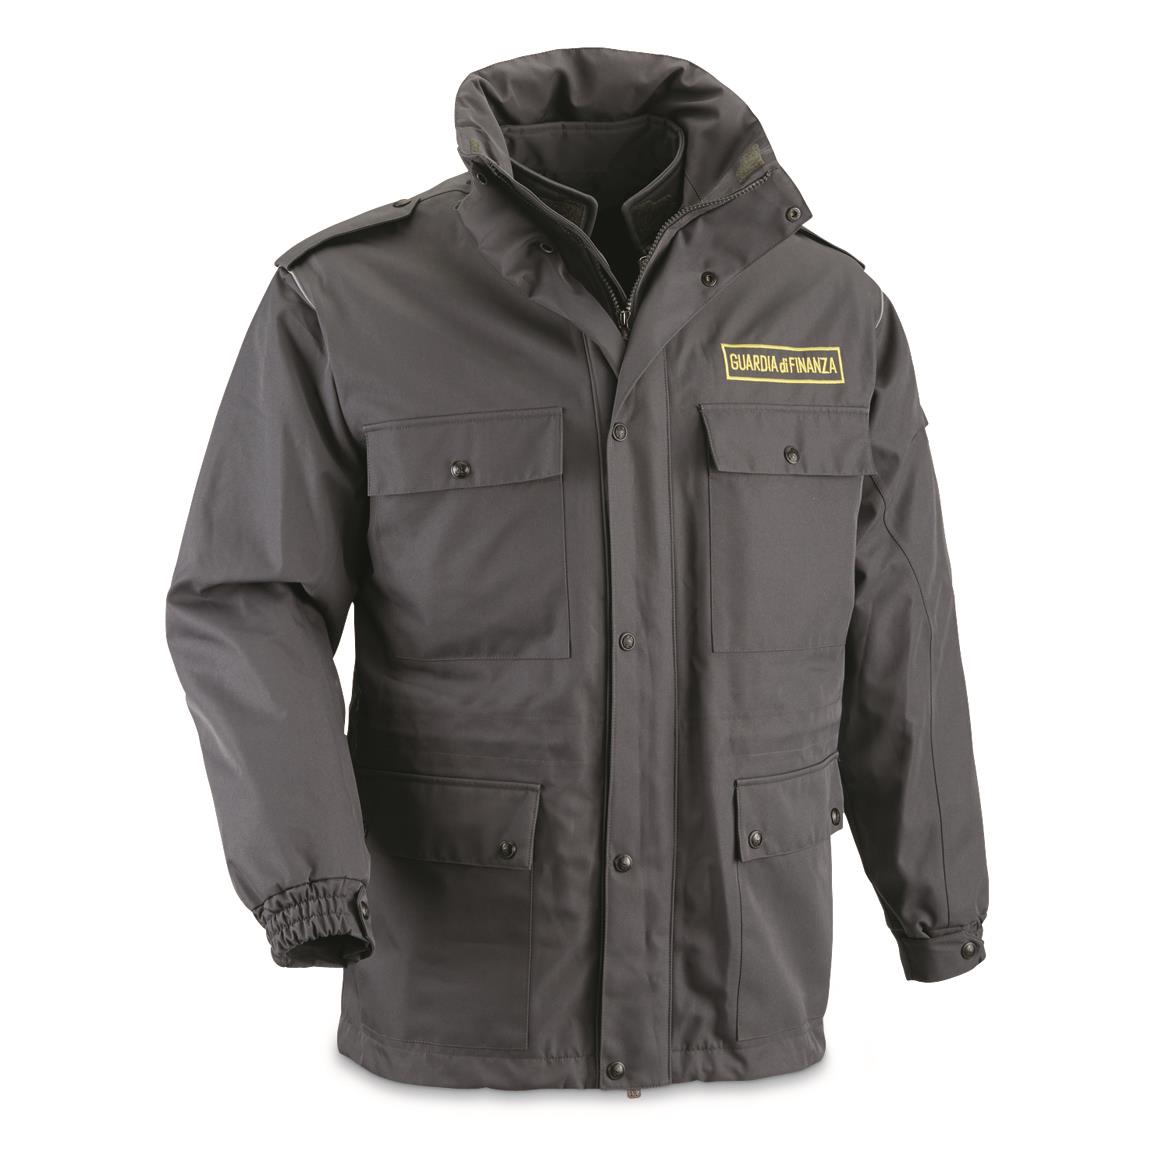 Breathable GORE-TEX® waterproof Parka shell